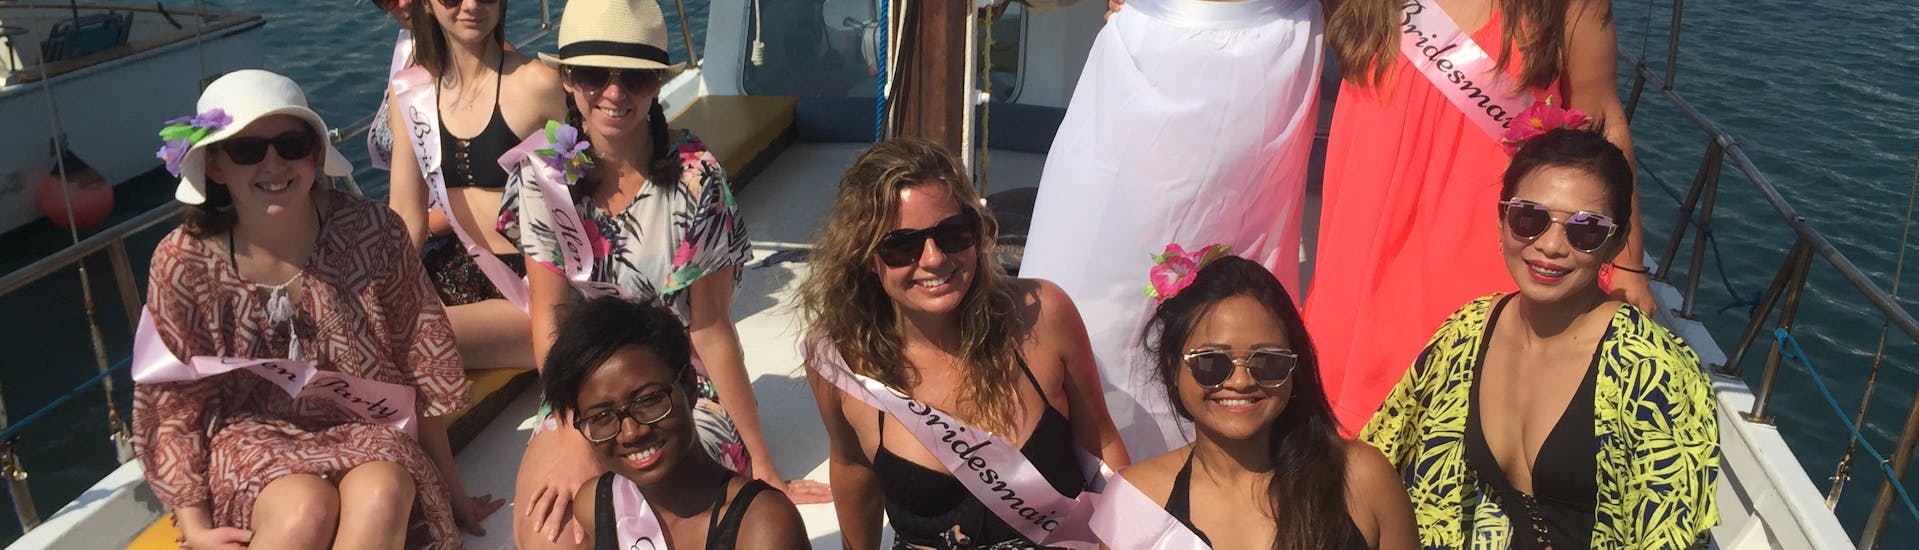 The bride and the bridesmaid are on the boat during a Private Boat Trip along the Cretian Coastline with Zorbas Cruises Hersonissos.